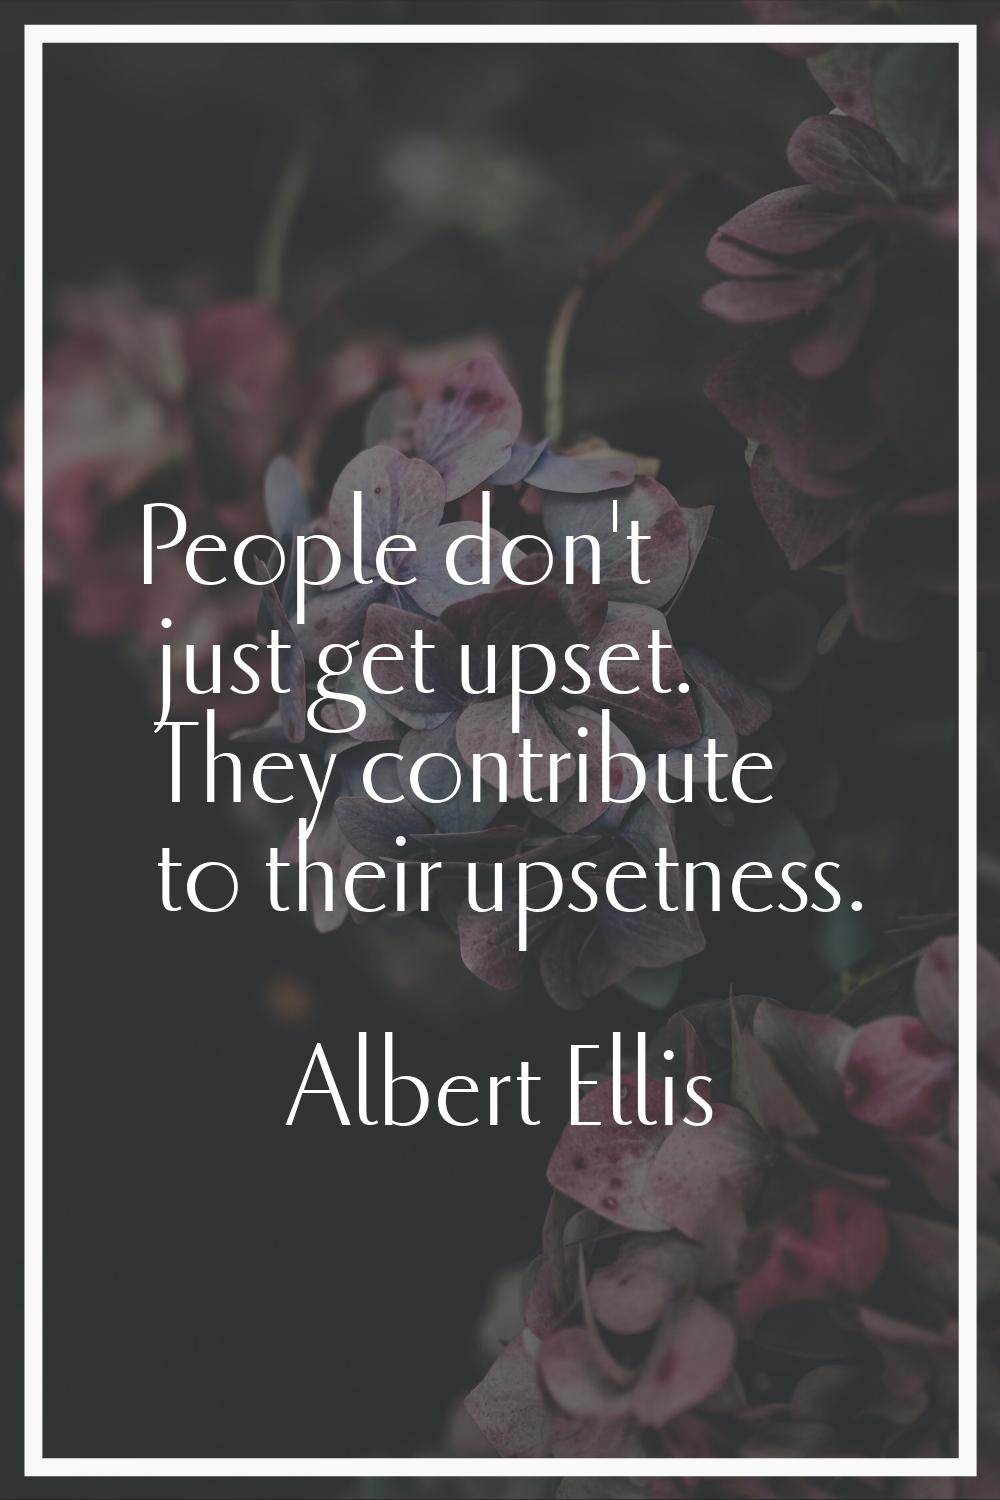 People don't just get upset. They contribute to their upsetness.